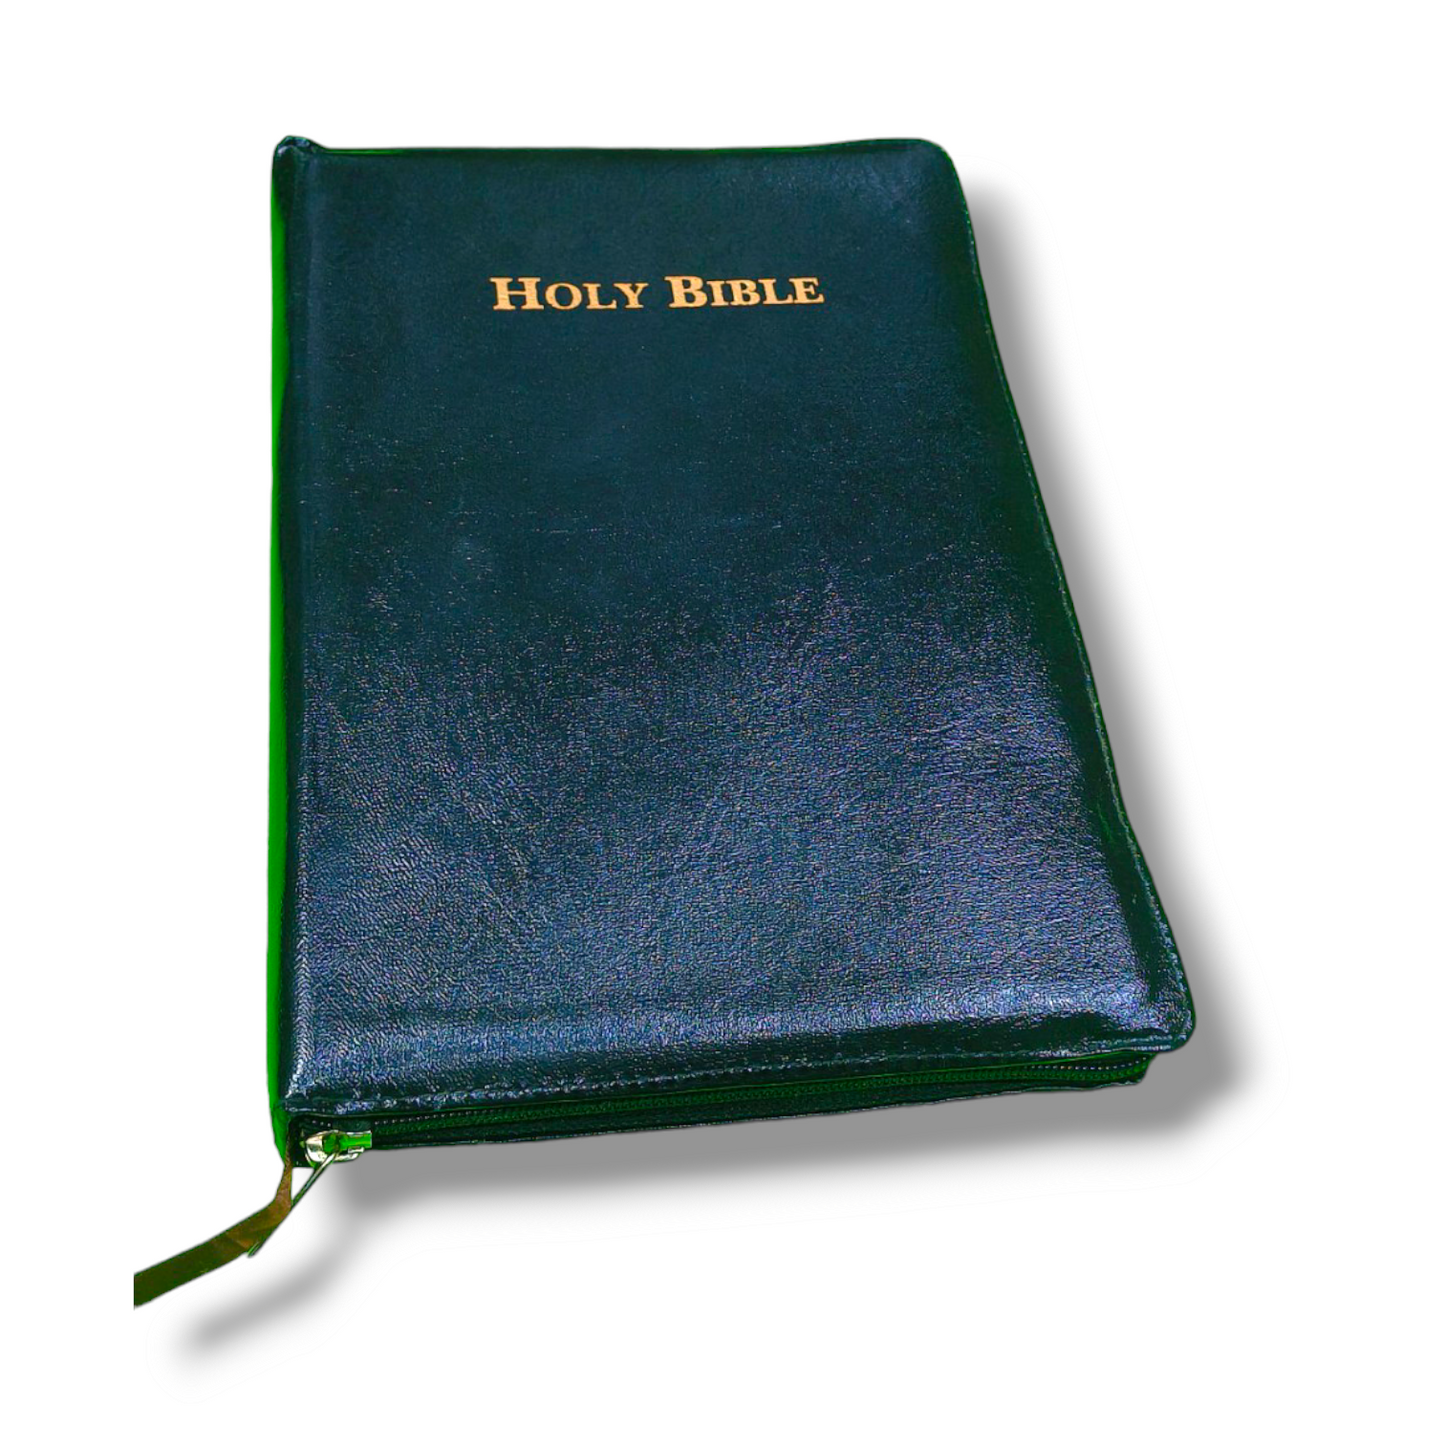 KJV Holman Rainbow Study Bible | Black Leather Touch | With Zip Edition | New Edition